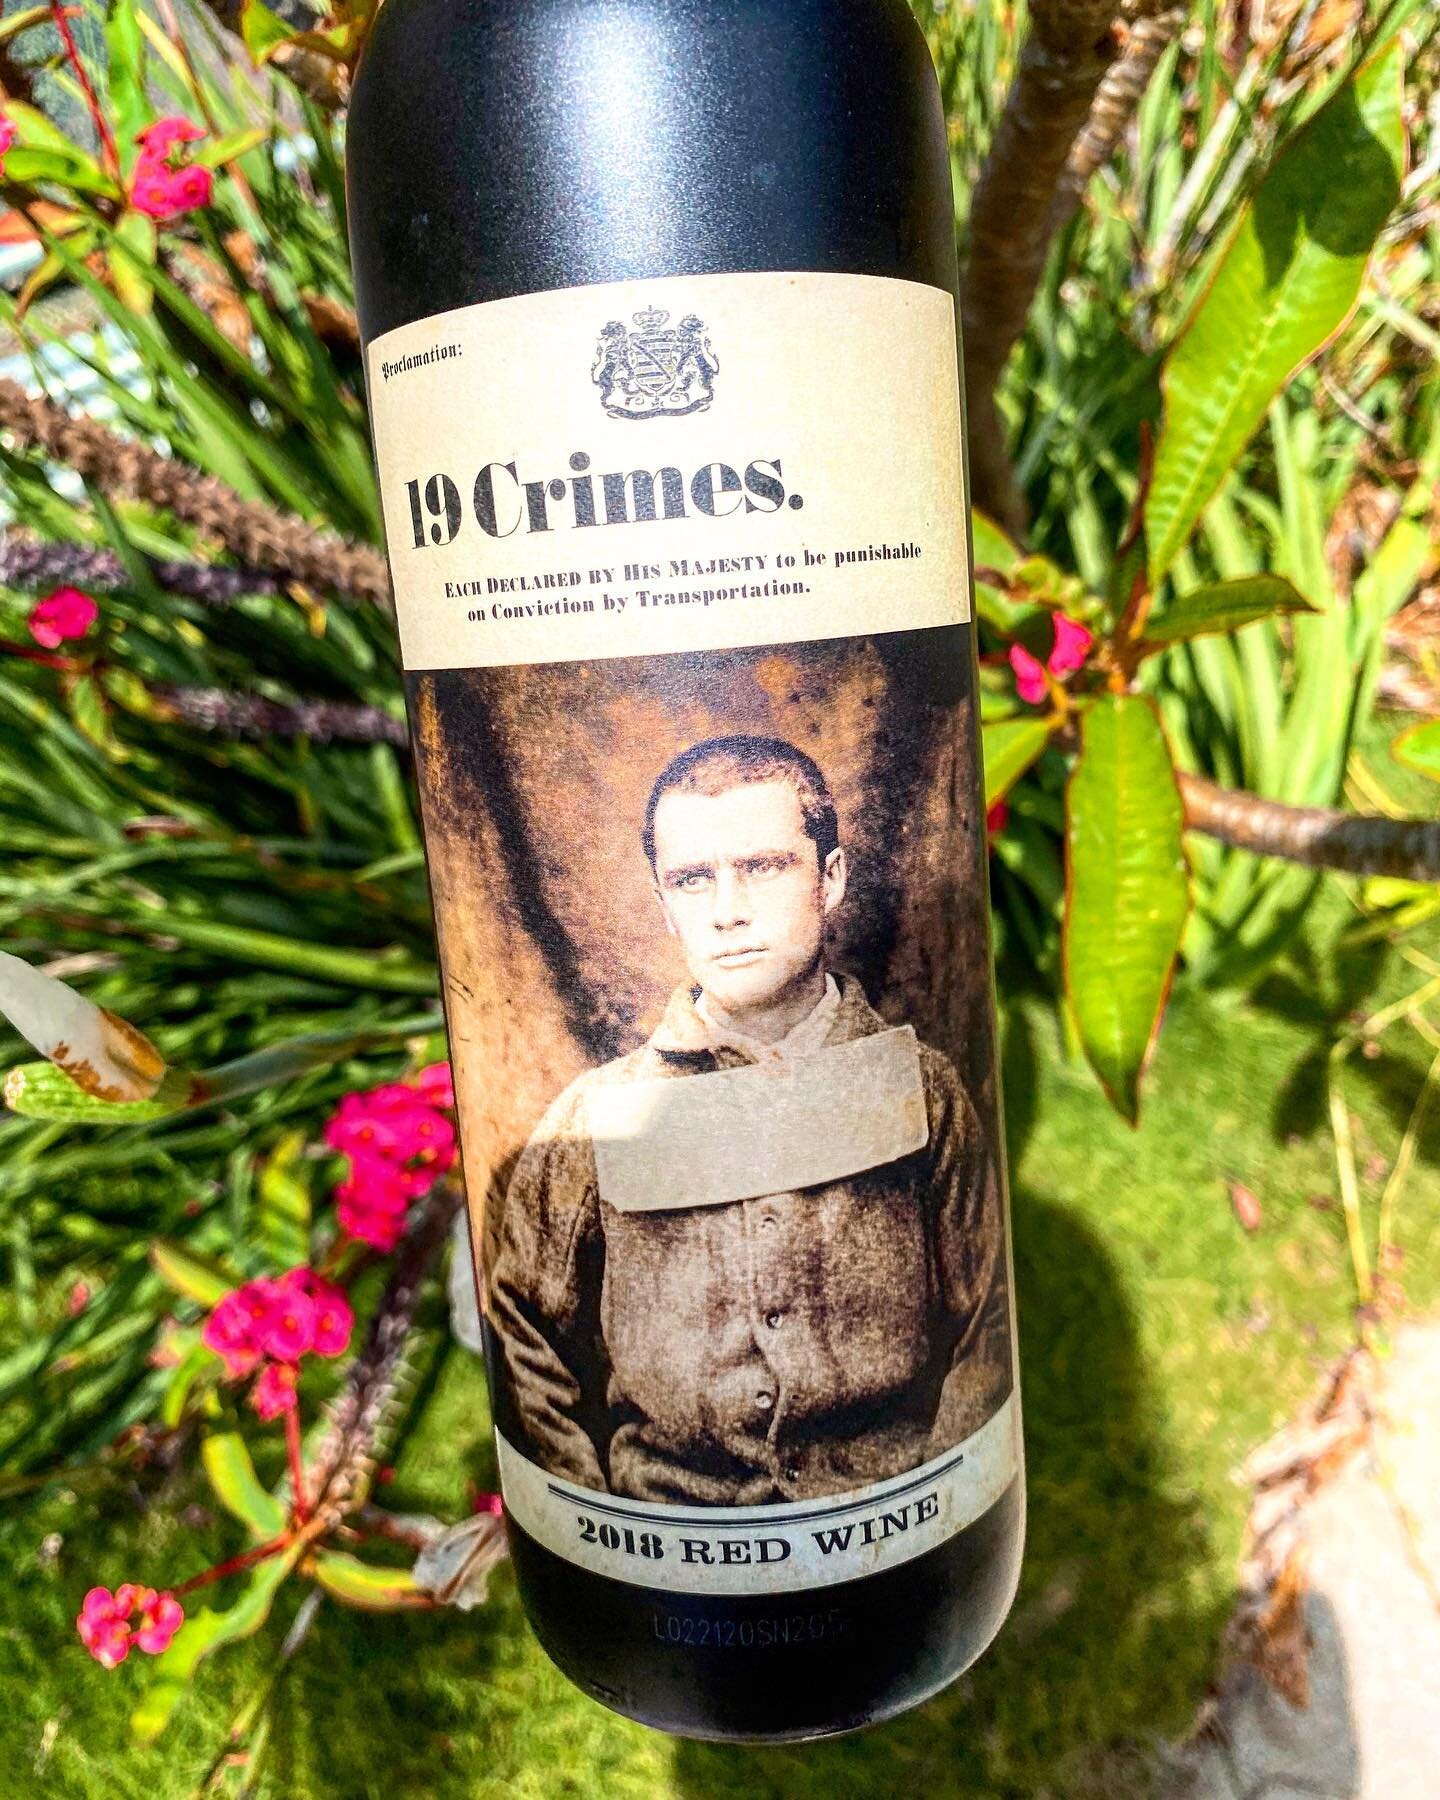 After drinking many (...many) bottles of @19crimes , I finally collected all 19 corks, including @snoopdogg Cali Red 🍷 I&rsquo;m a big fan of 19 Crimes wines and can&rsquo;t wait to see who they collab with next. 🥳 Anyone else collect all 19 corks?